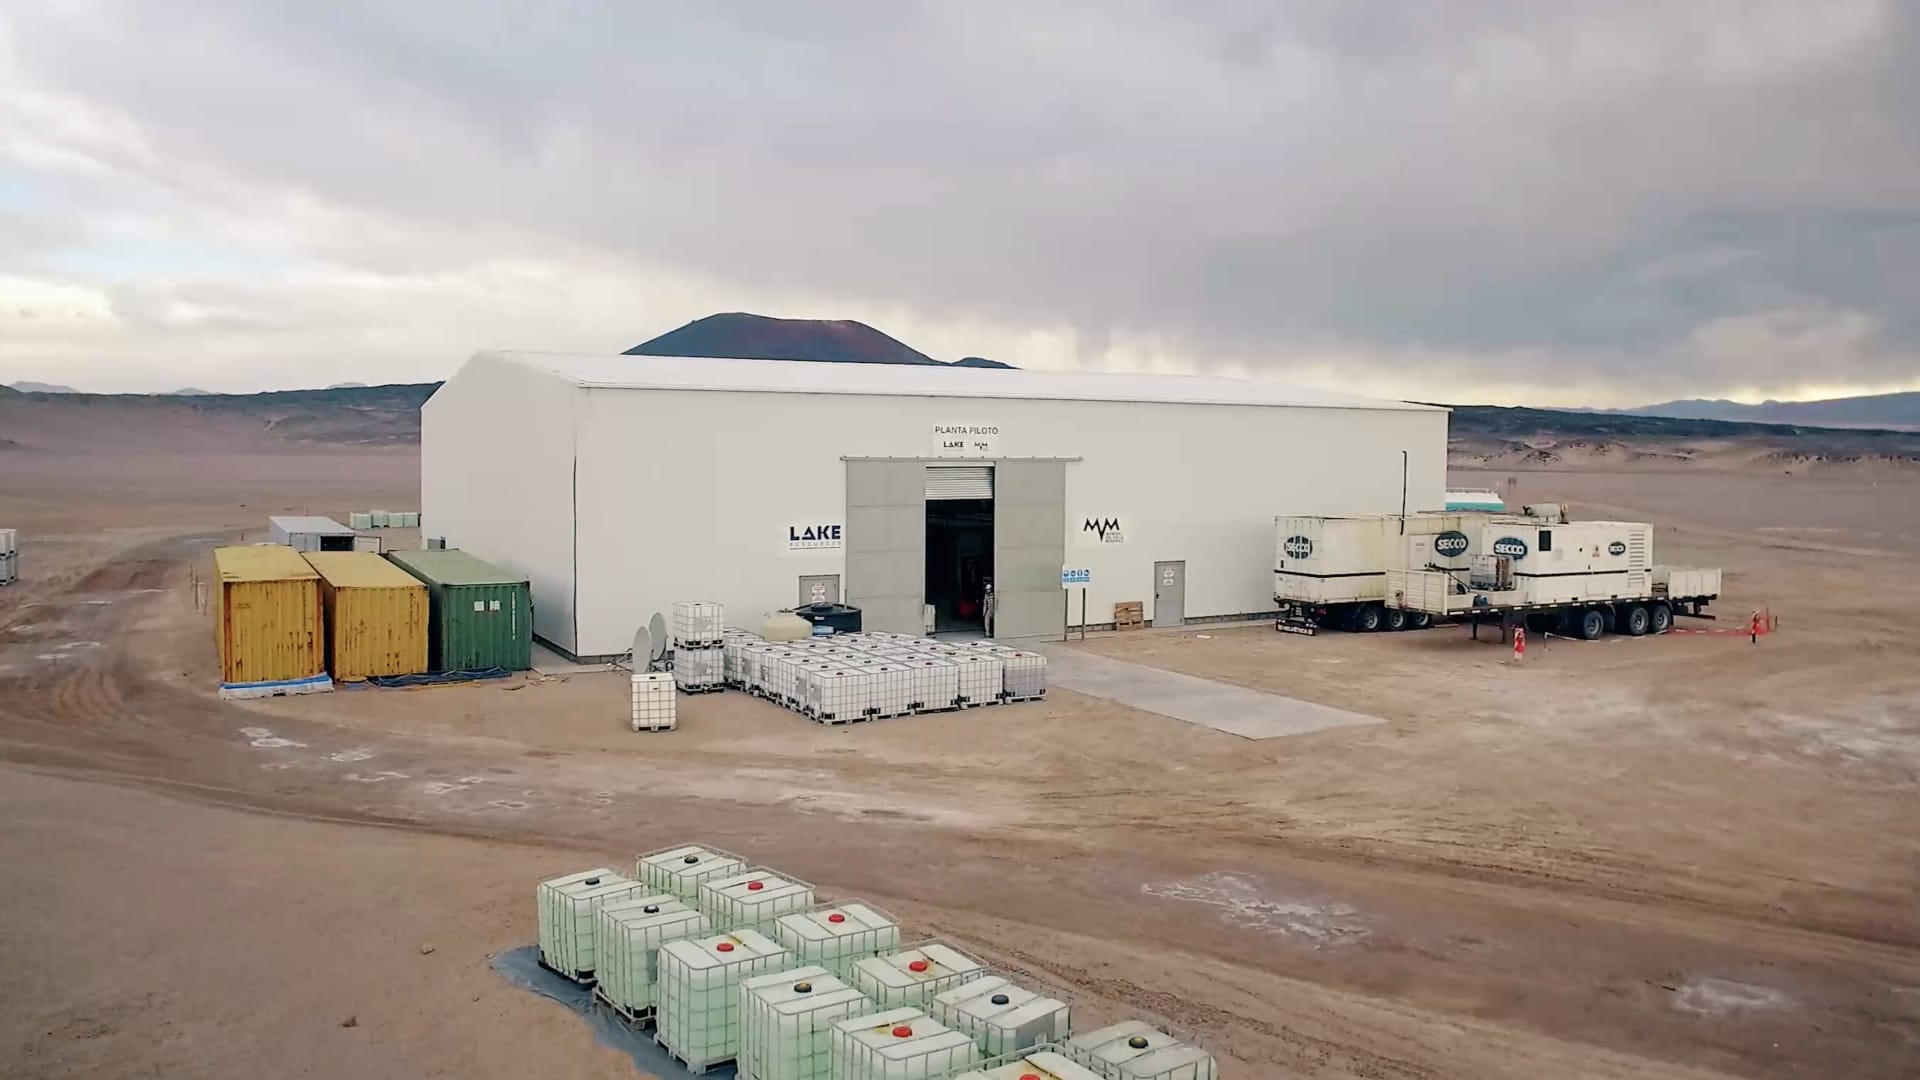 Lilac Solutions is developing a direct lithium extraction facility in Argentina in partnership with Australian lithium company Lake Resources.